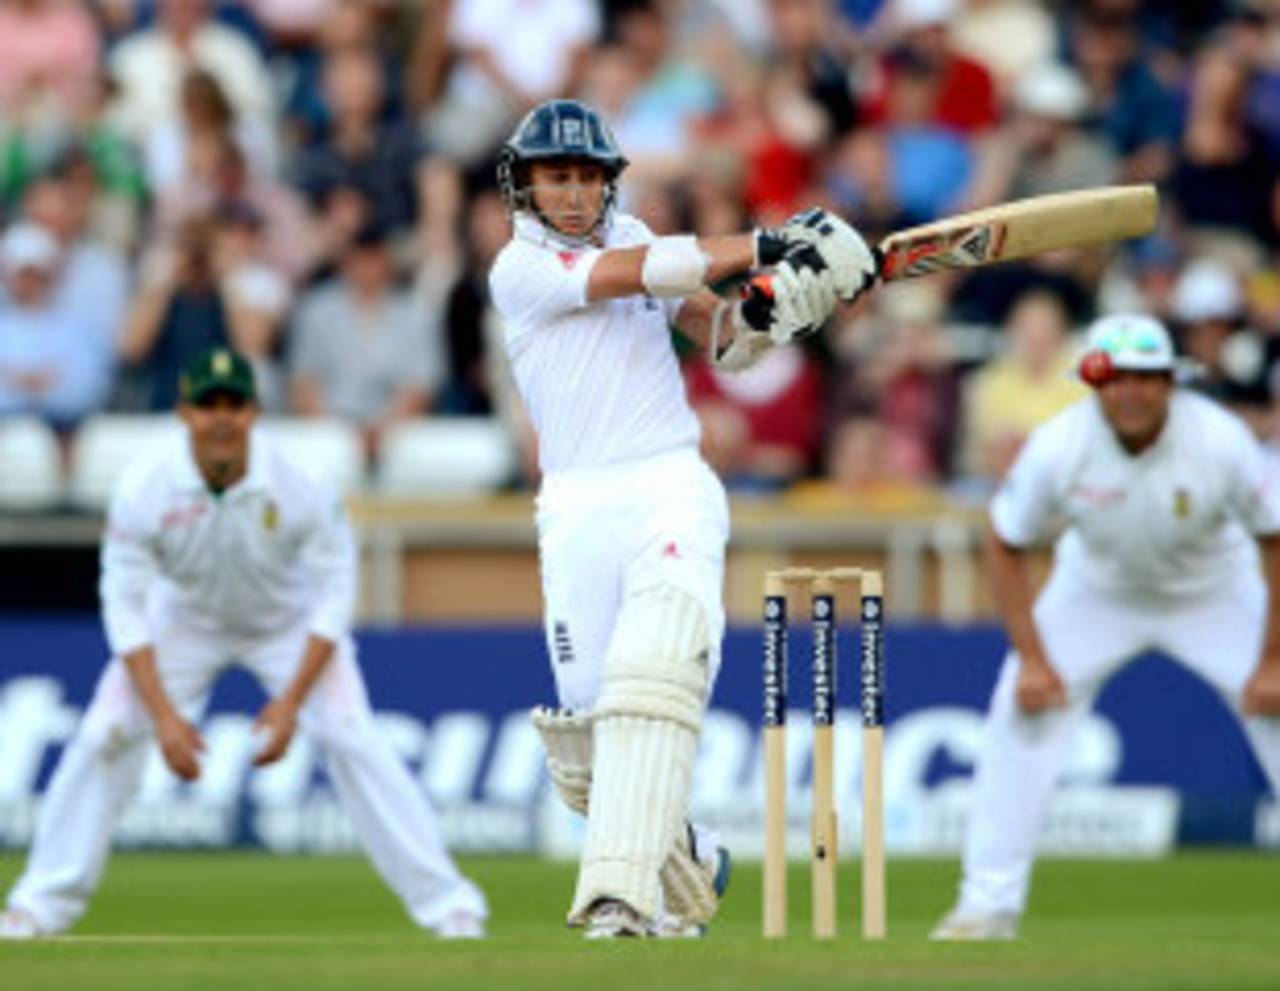 James Taylor played a battling innings on his Test debut at Headingley&nbsp;&nbsp;&bull;&nbsp;&nbsp;Getty Images